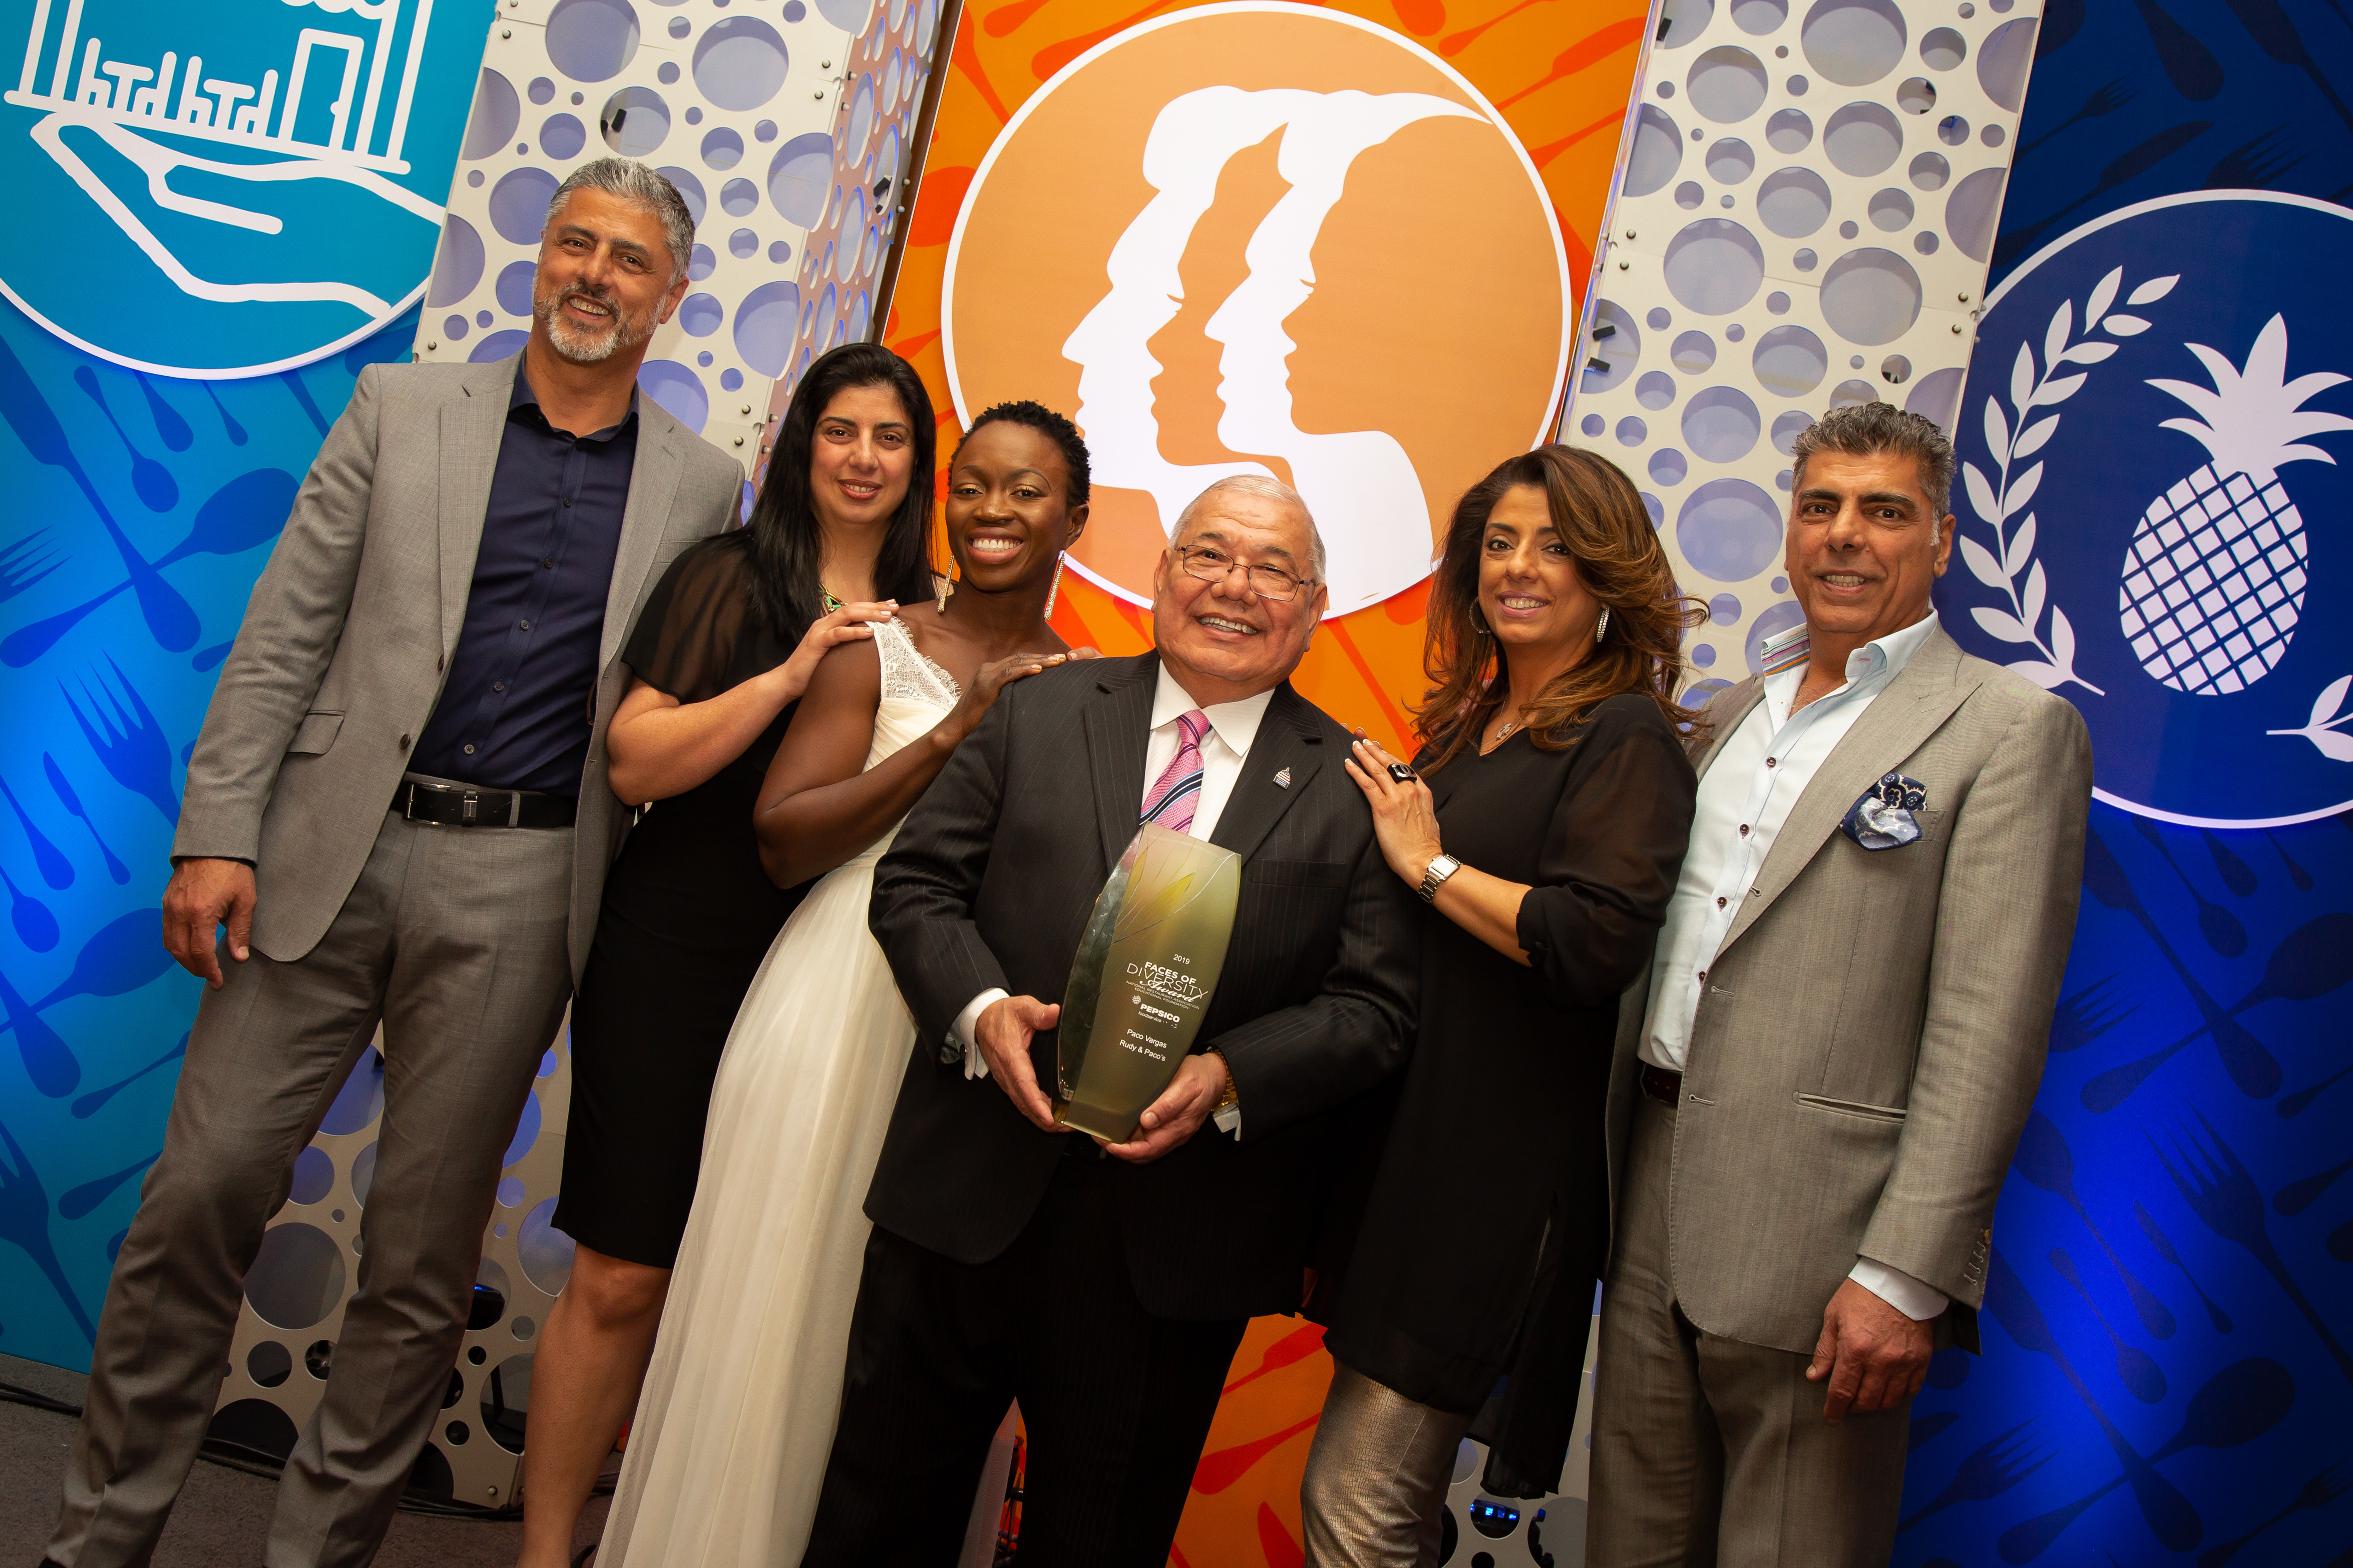 The Restaurant Industry awards recognize the restaurant industry’s impact on diversity, community service and hospitality in local communities across the country.